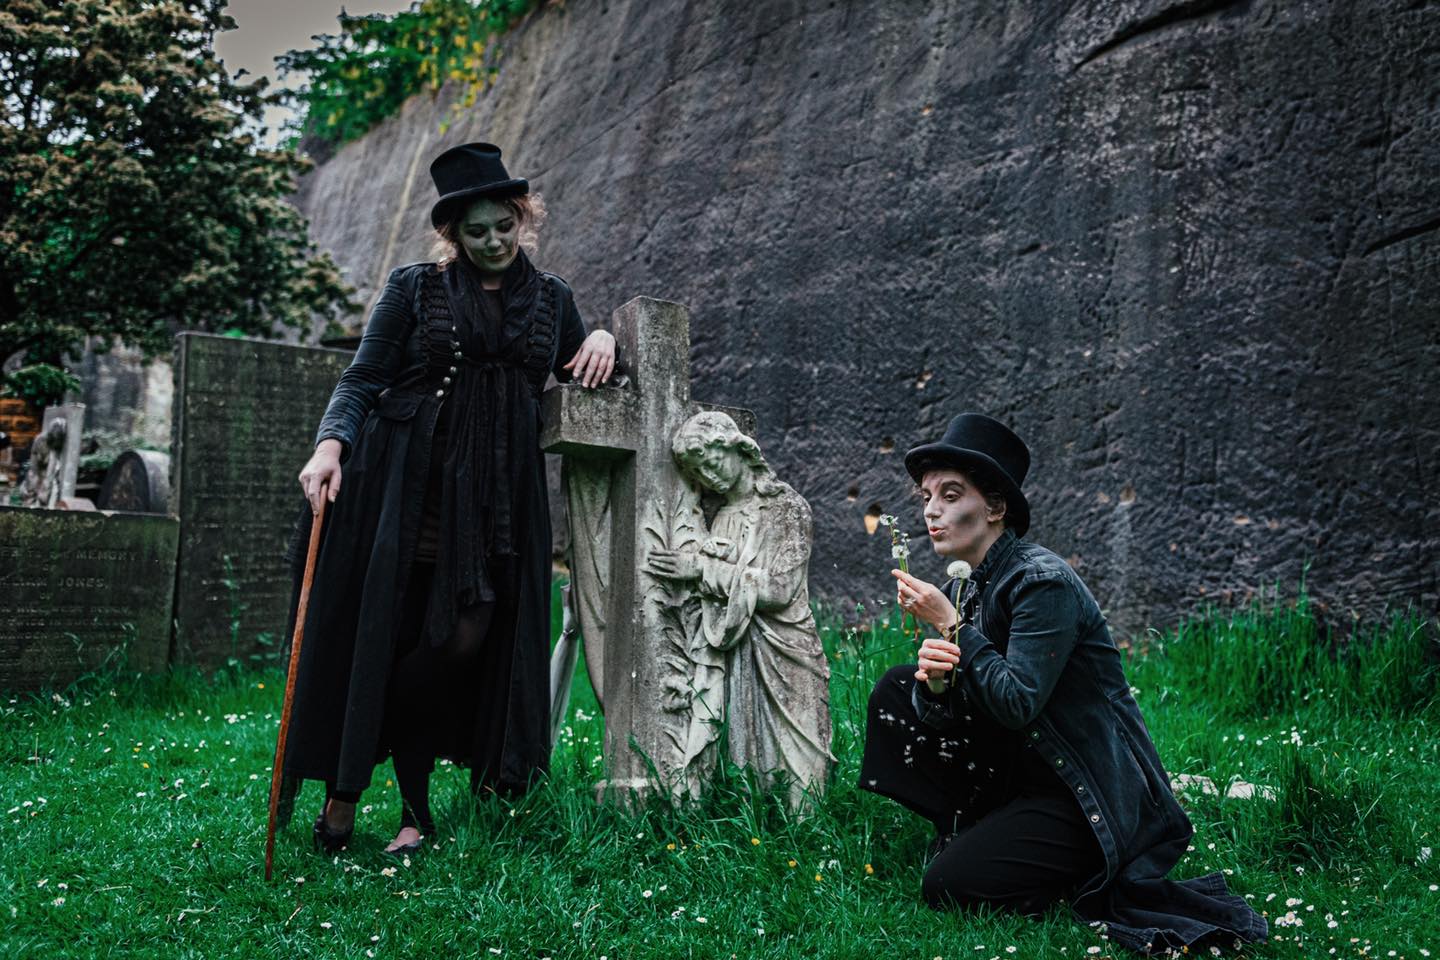 Learn about the ghostly stories of the times gone by on this walking tour. Buy Secret Garden Cemetery Shivers tour tickets now.